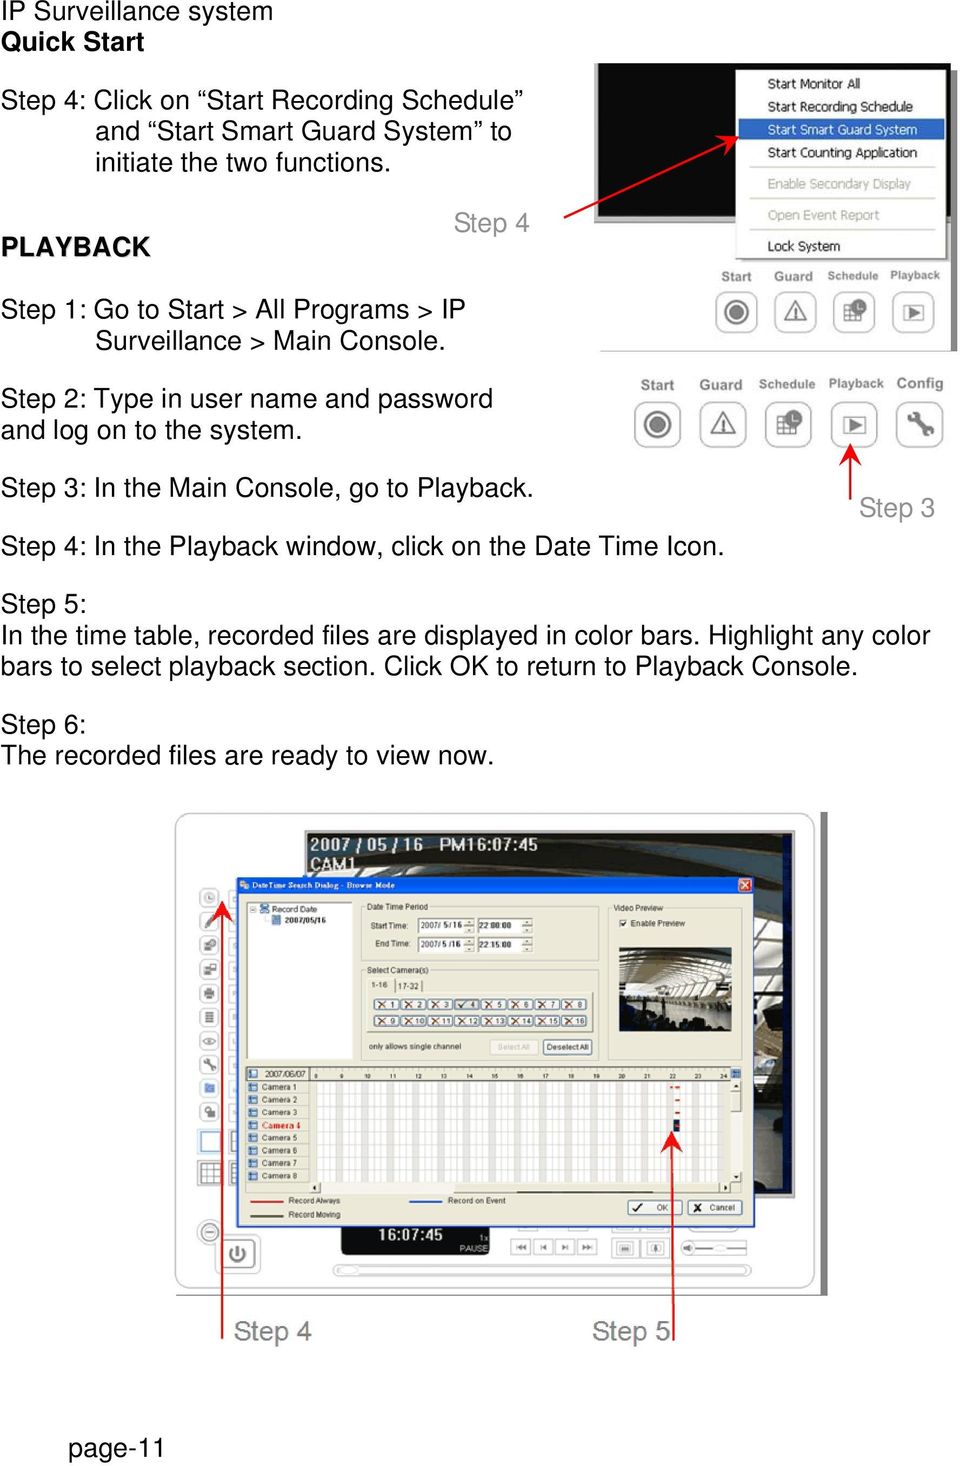 Step 3: In the Main Console, go to Playback. Step 4: In the Playback window, click on the Date Time Icon.